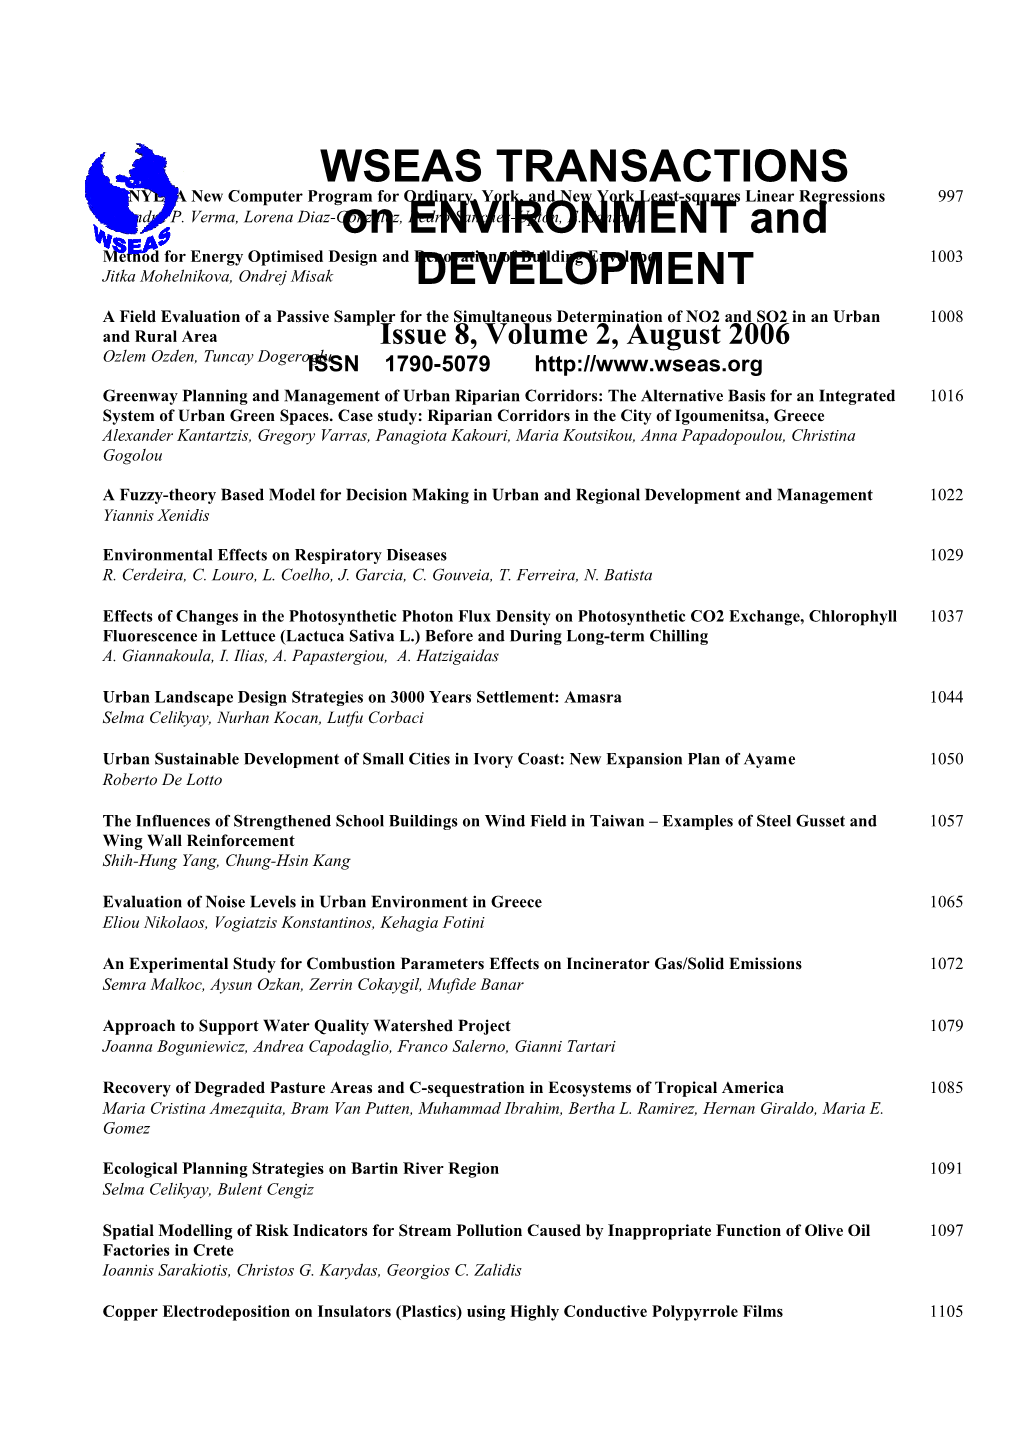 WSEAS TRANSACTIONS on ENVIRONMENT and DEVELOPMENT, August 2006